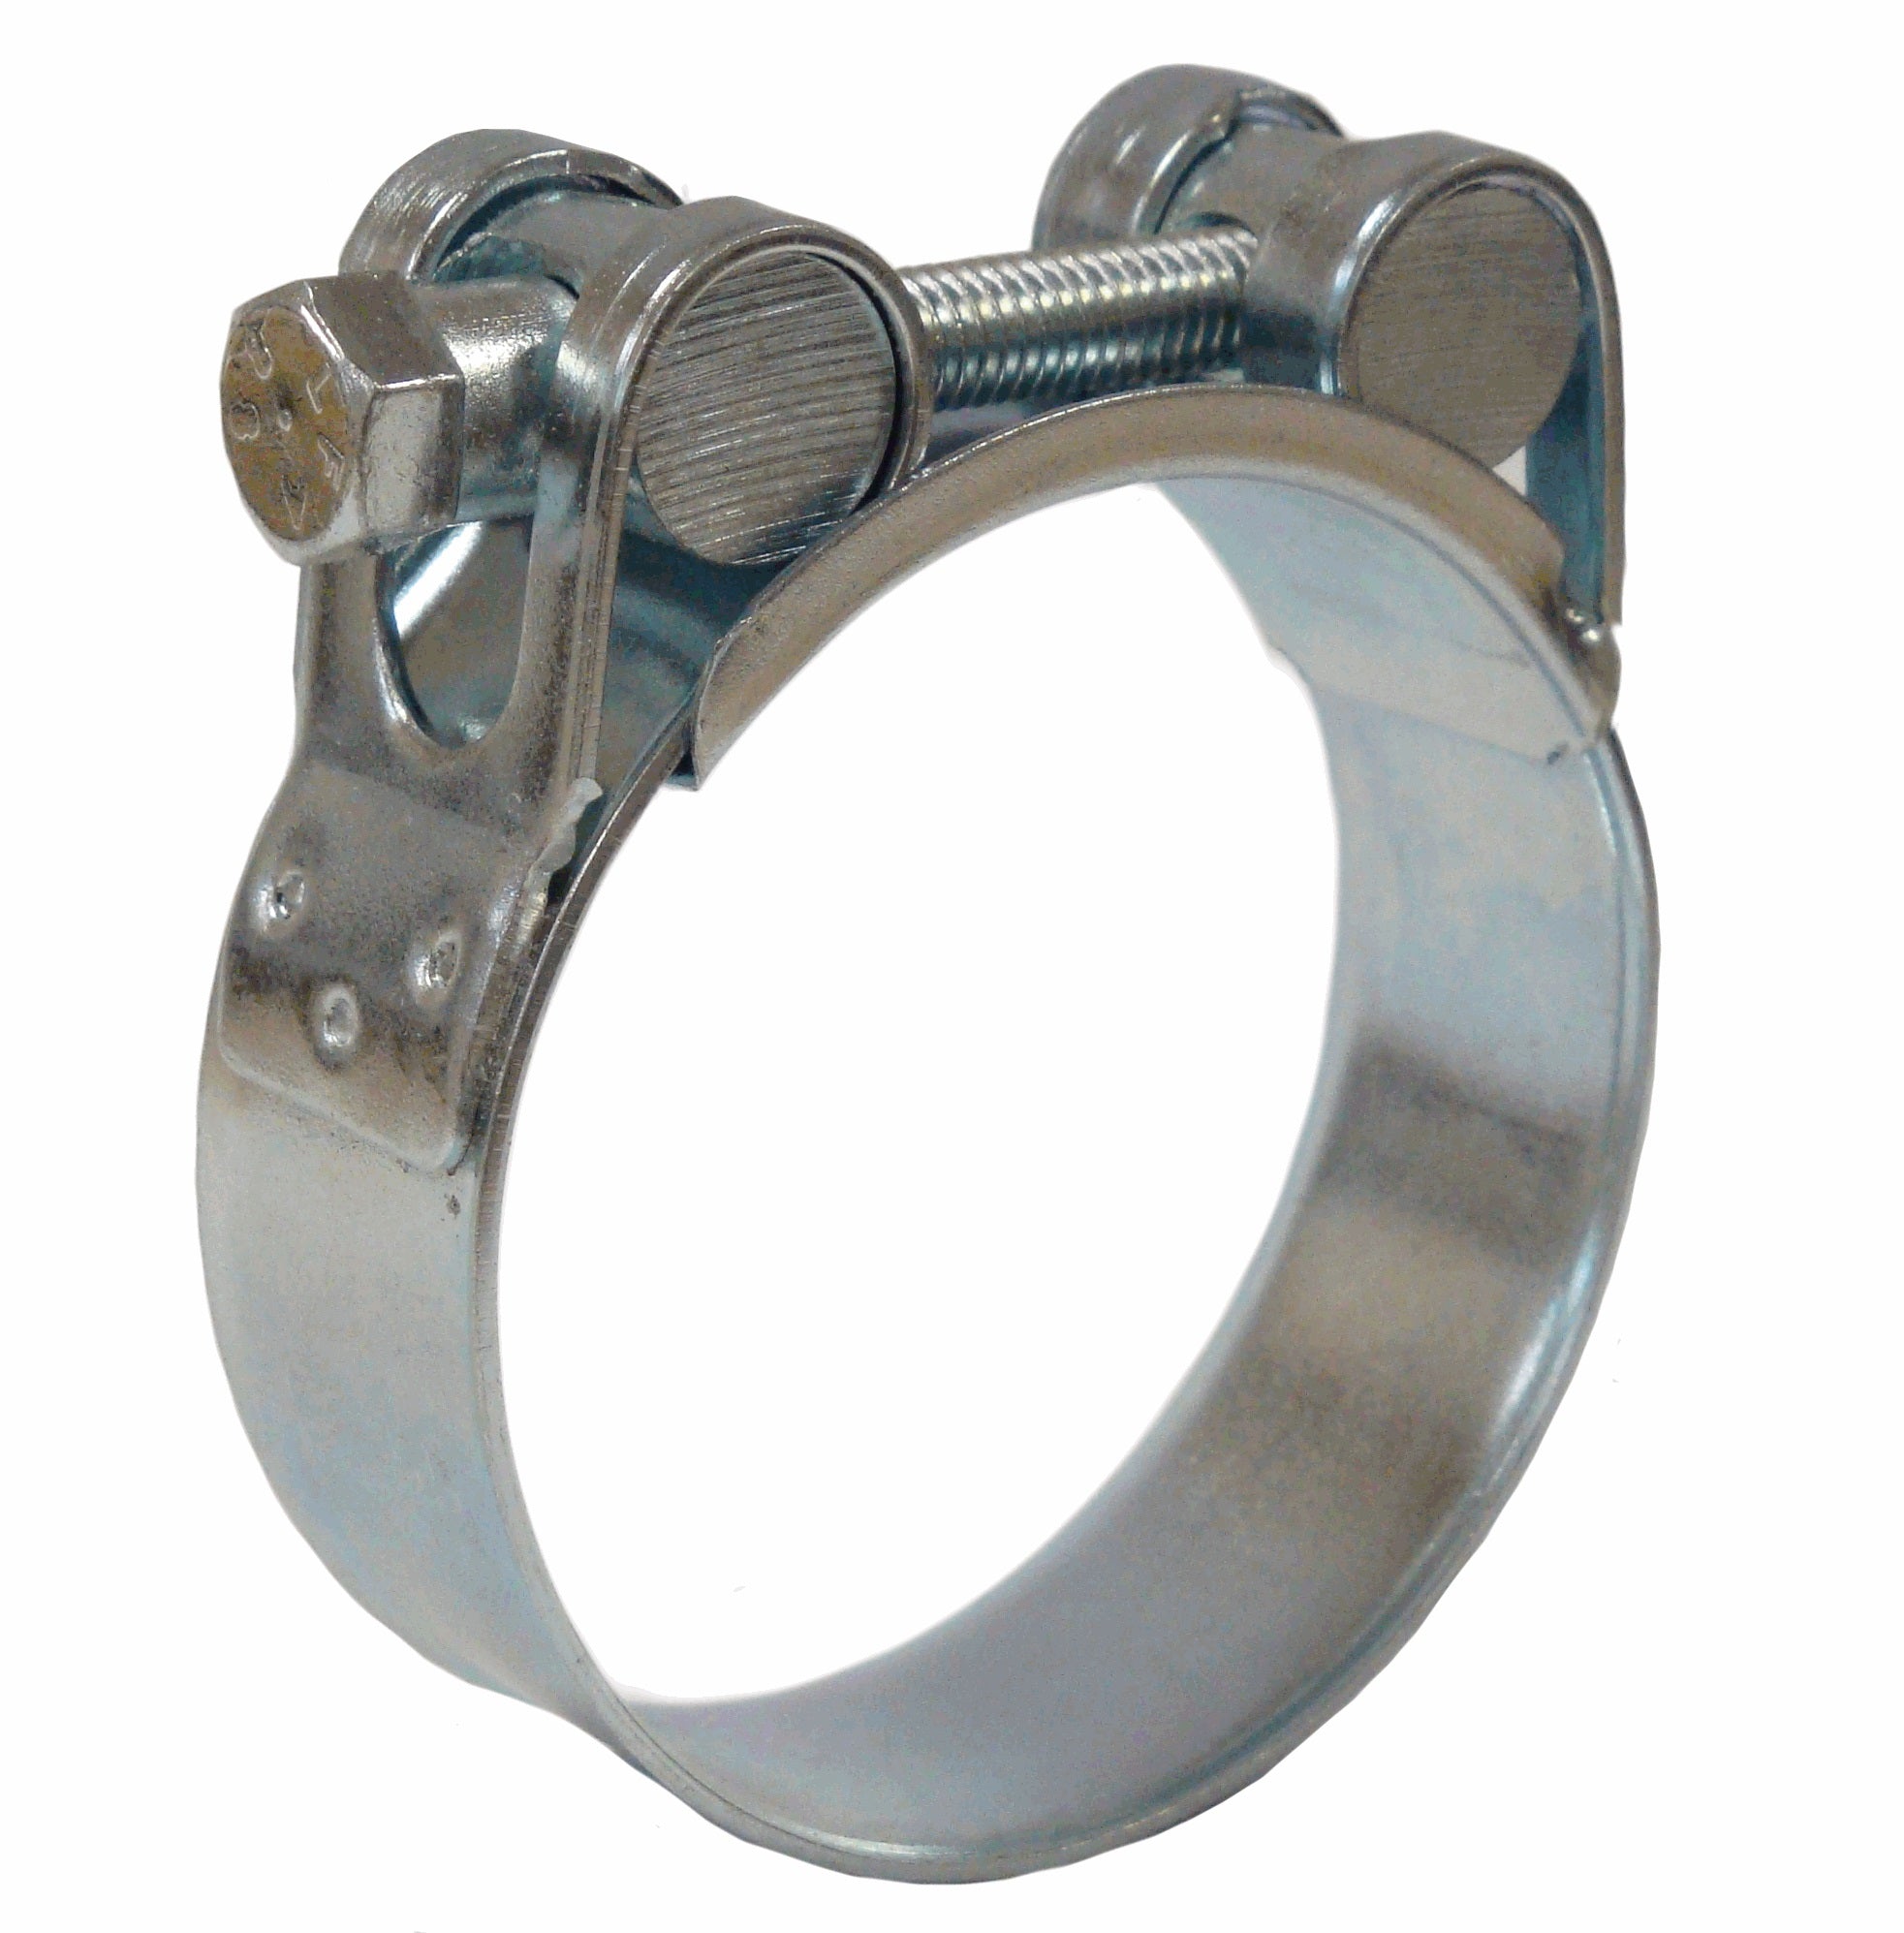 Jubilee® Superclamp 140-148mm 316 Stainless Steel